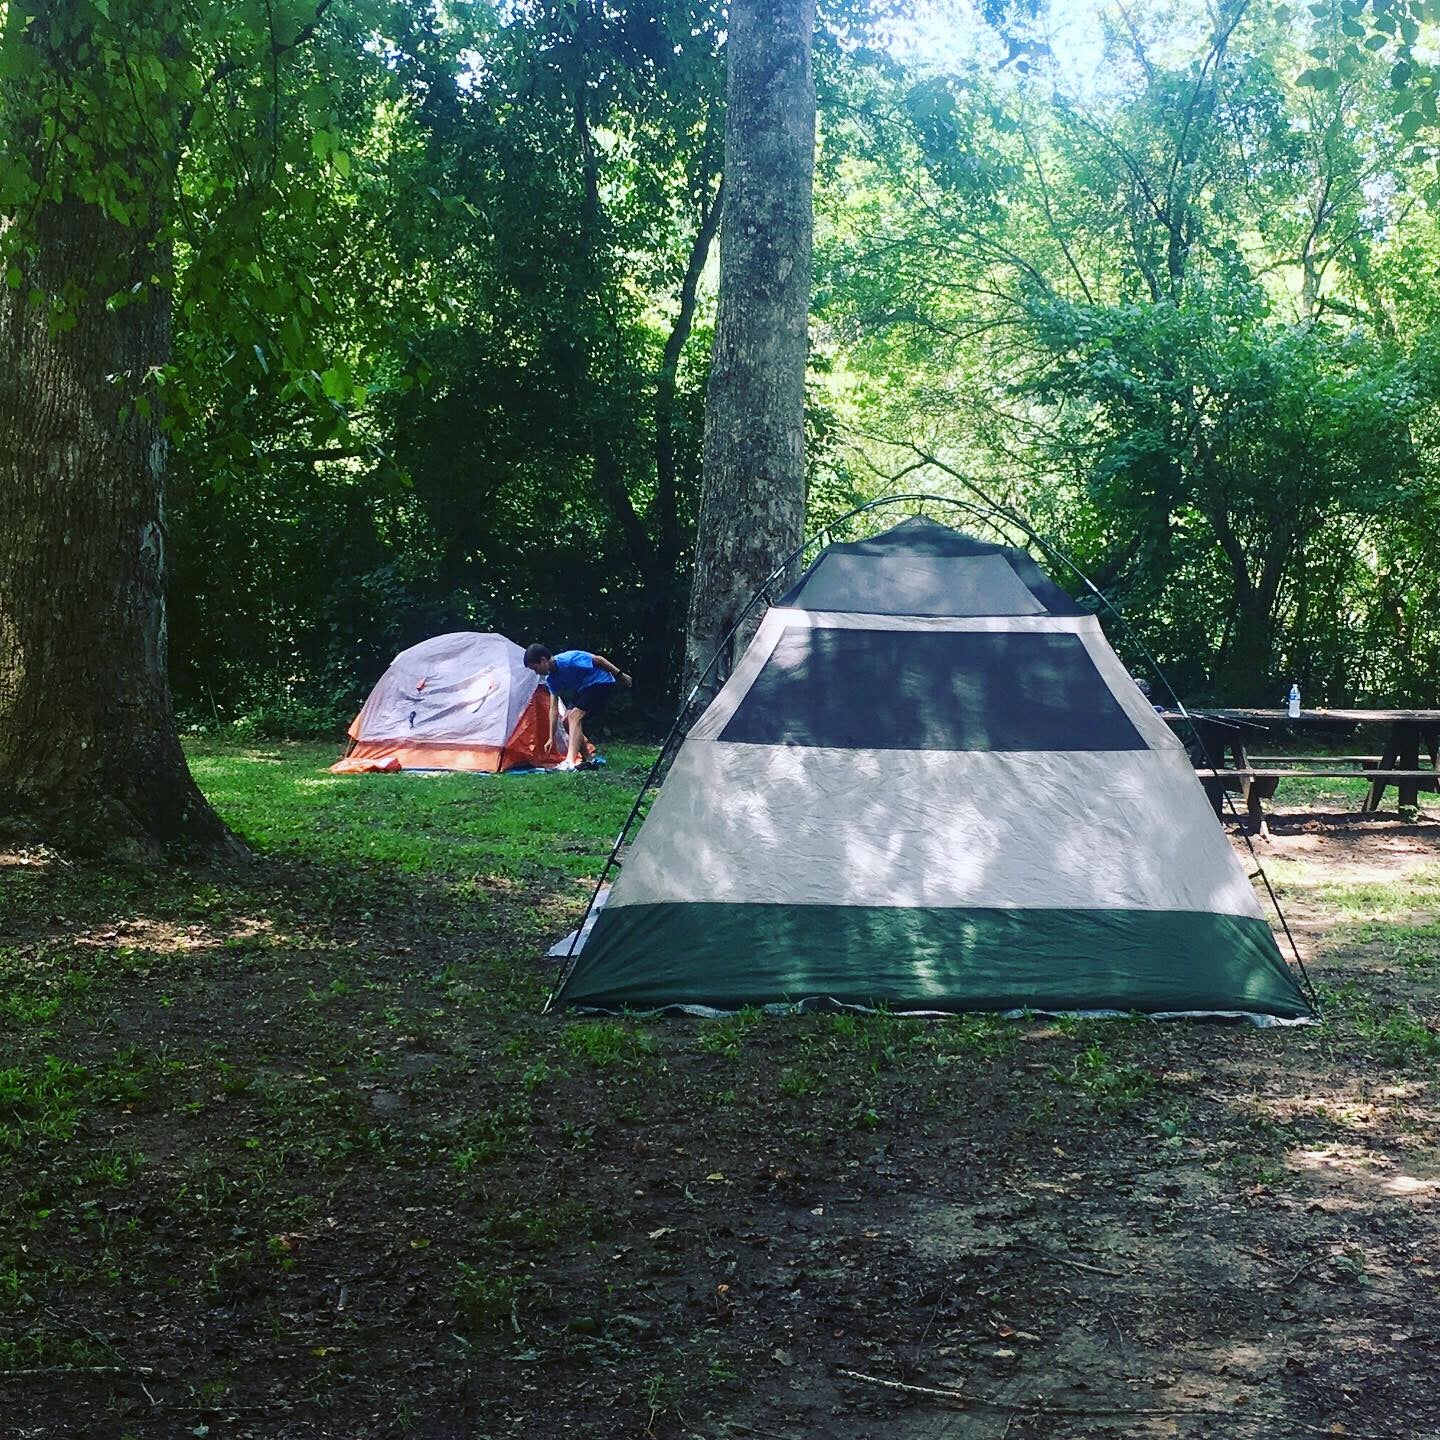 Camper submitted image from Hiwassee River Area - 5